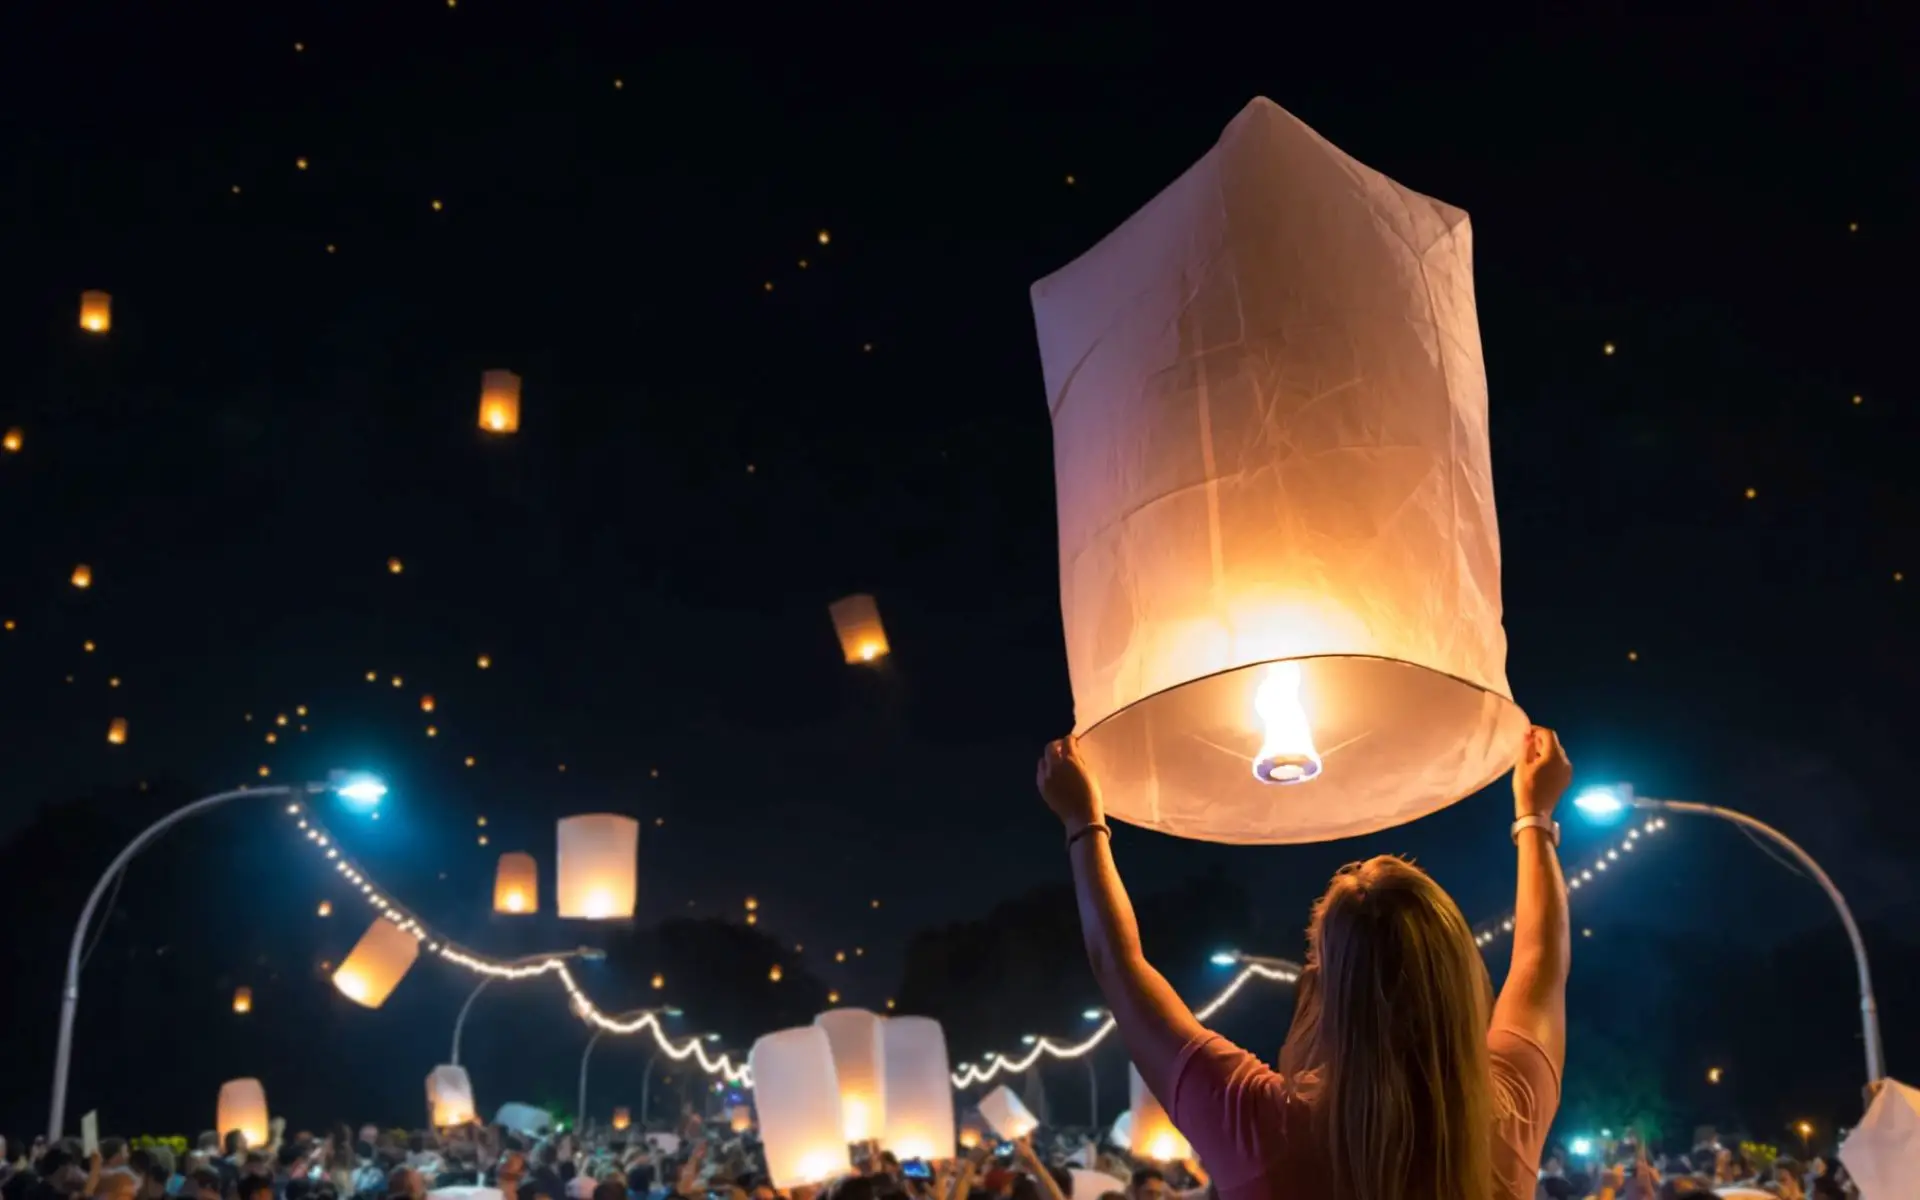 Sky Lanterns Are Bad For the Environment